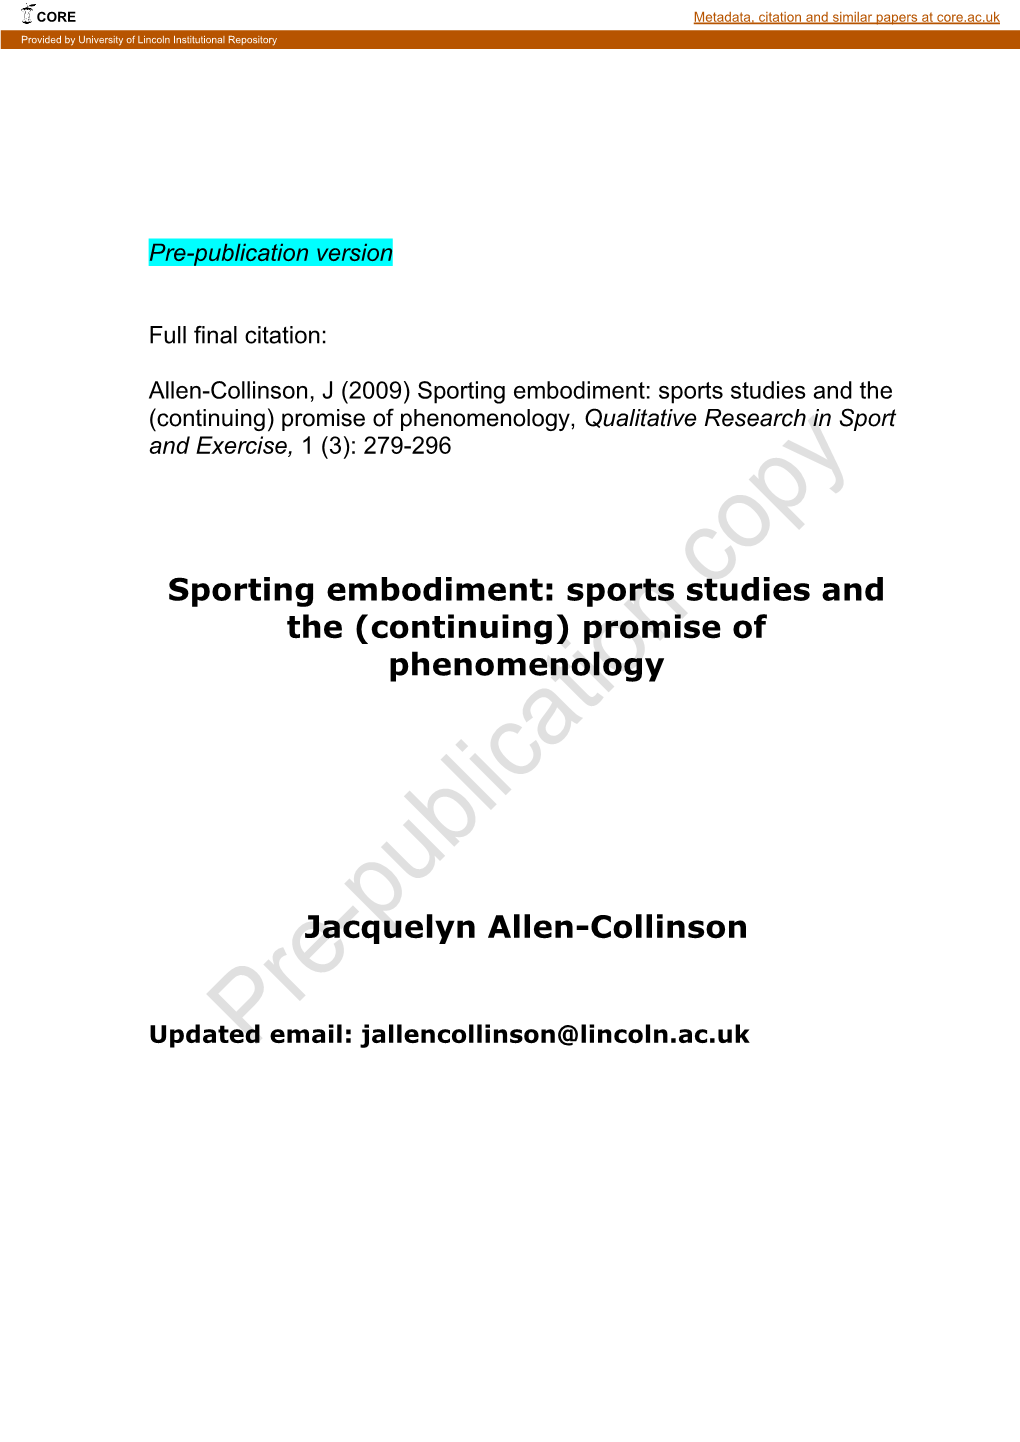 Promise of Phenomenology, Qualitative Research in Sport and Exercise, 1 (3): 279-296